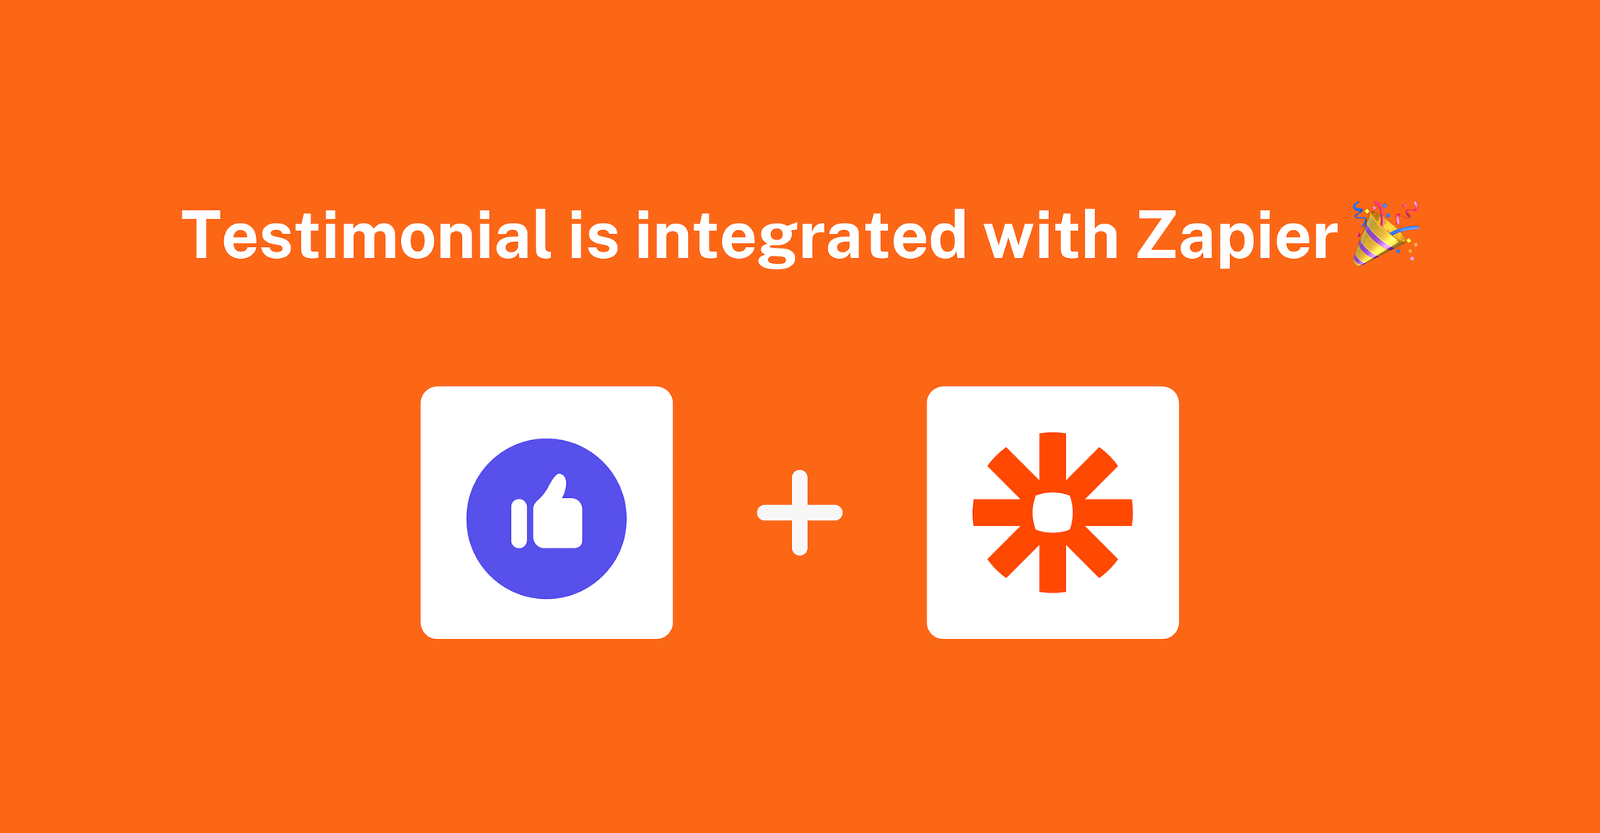 Introducing our integration with Zapier